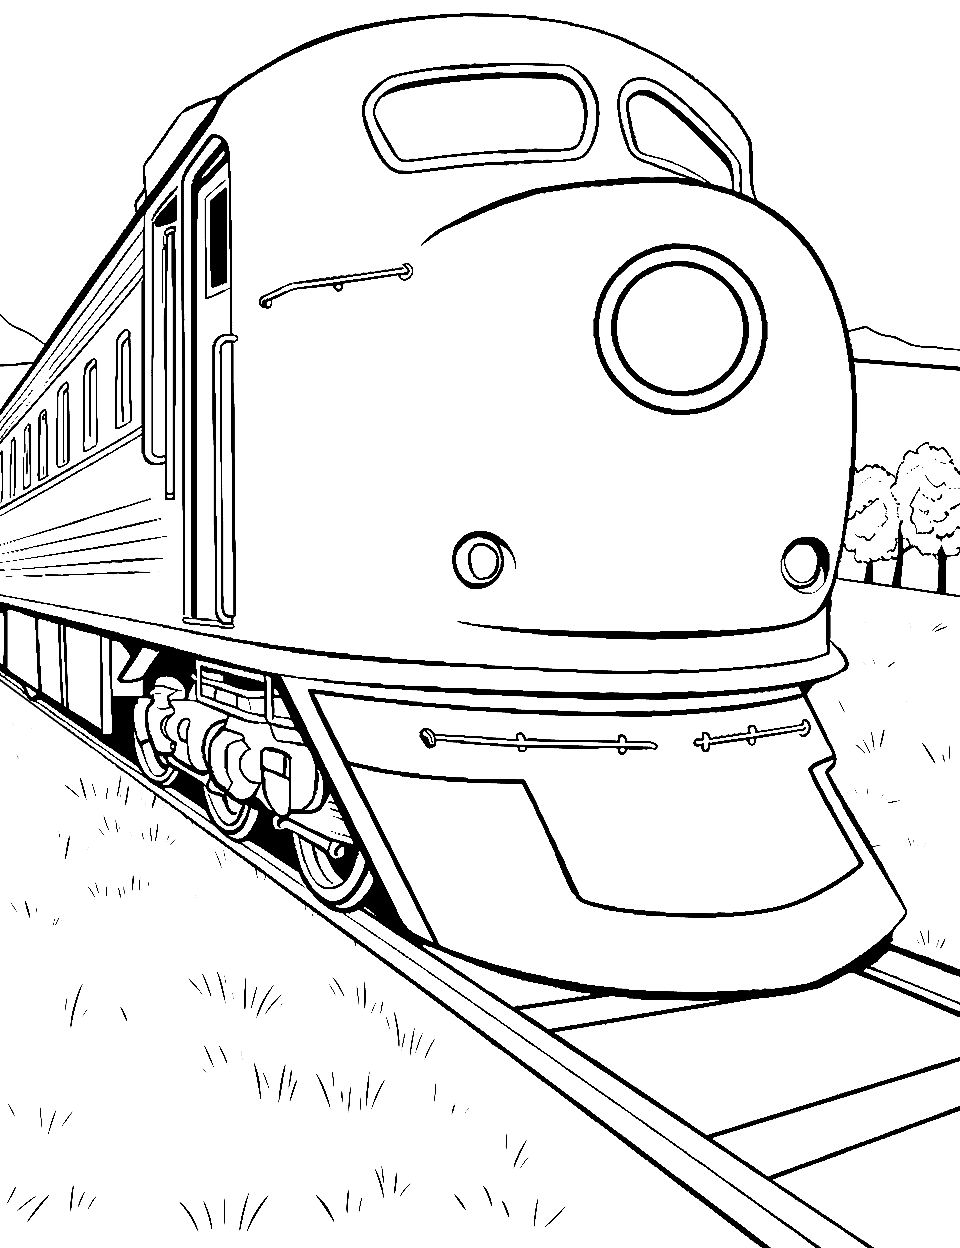 Passenger Train Coloring Page - A sleek train gliding through countryside.